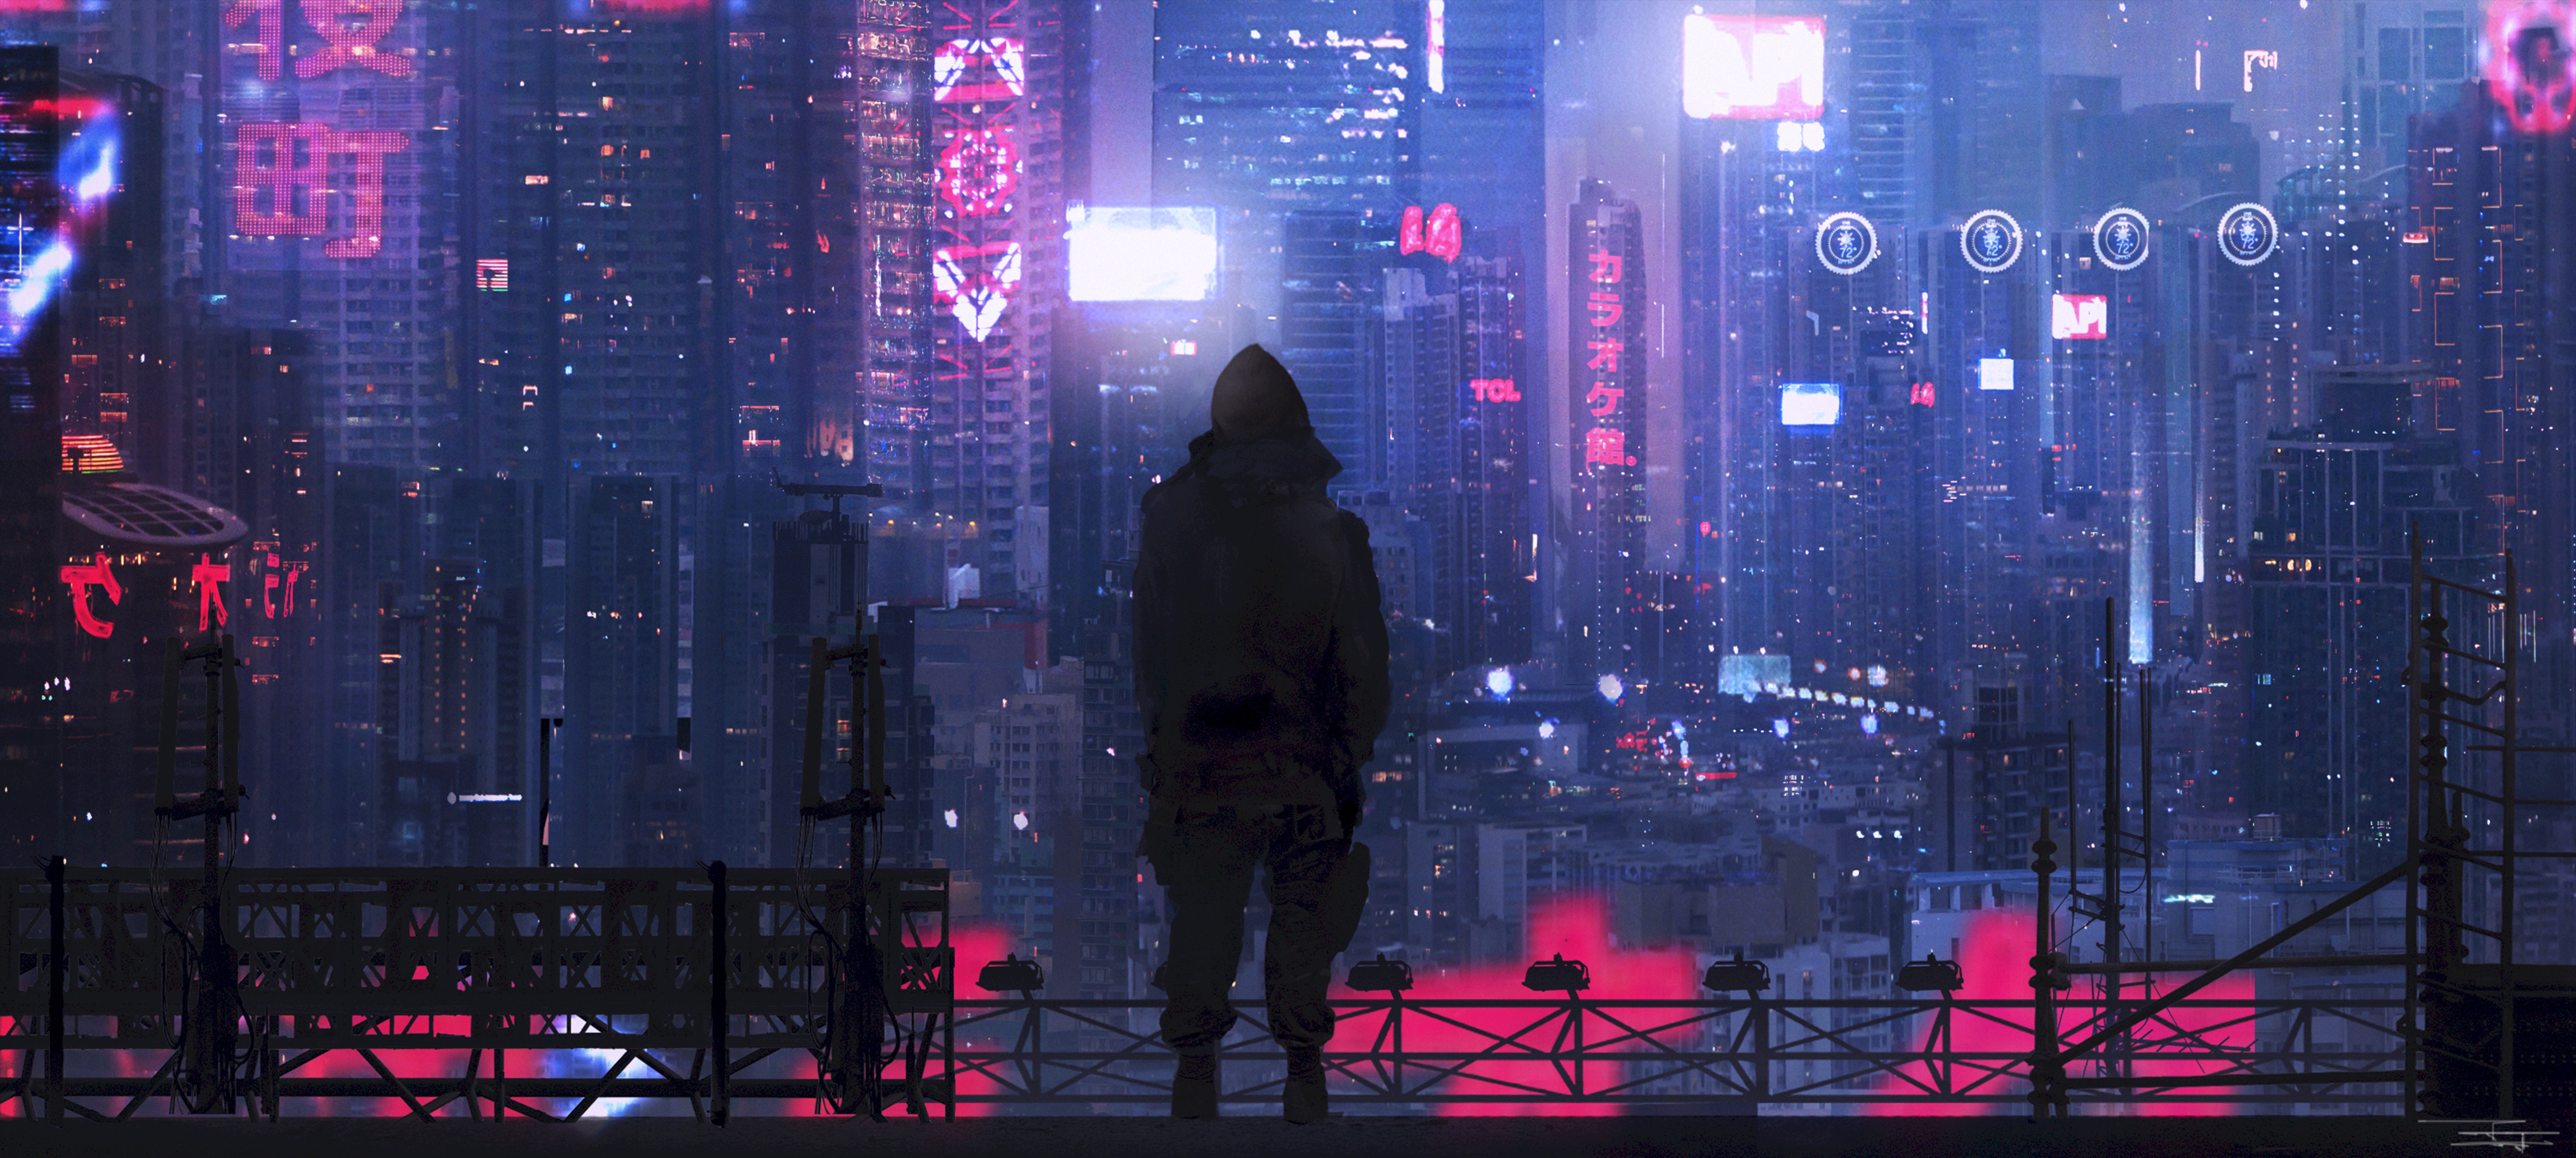 Cyberpunk Square Wallpapers